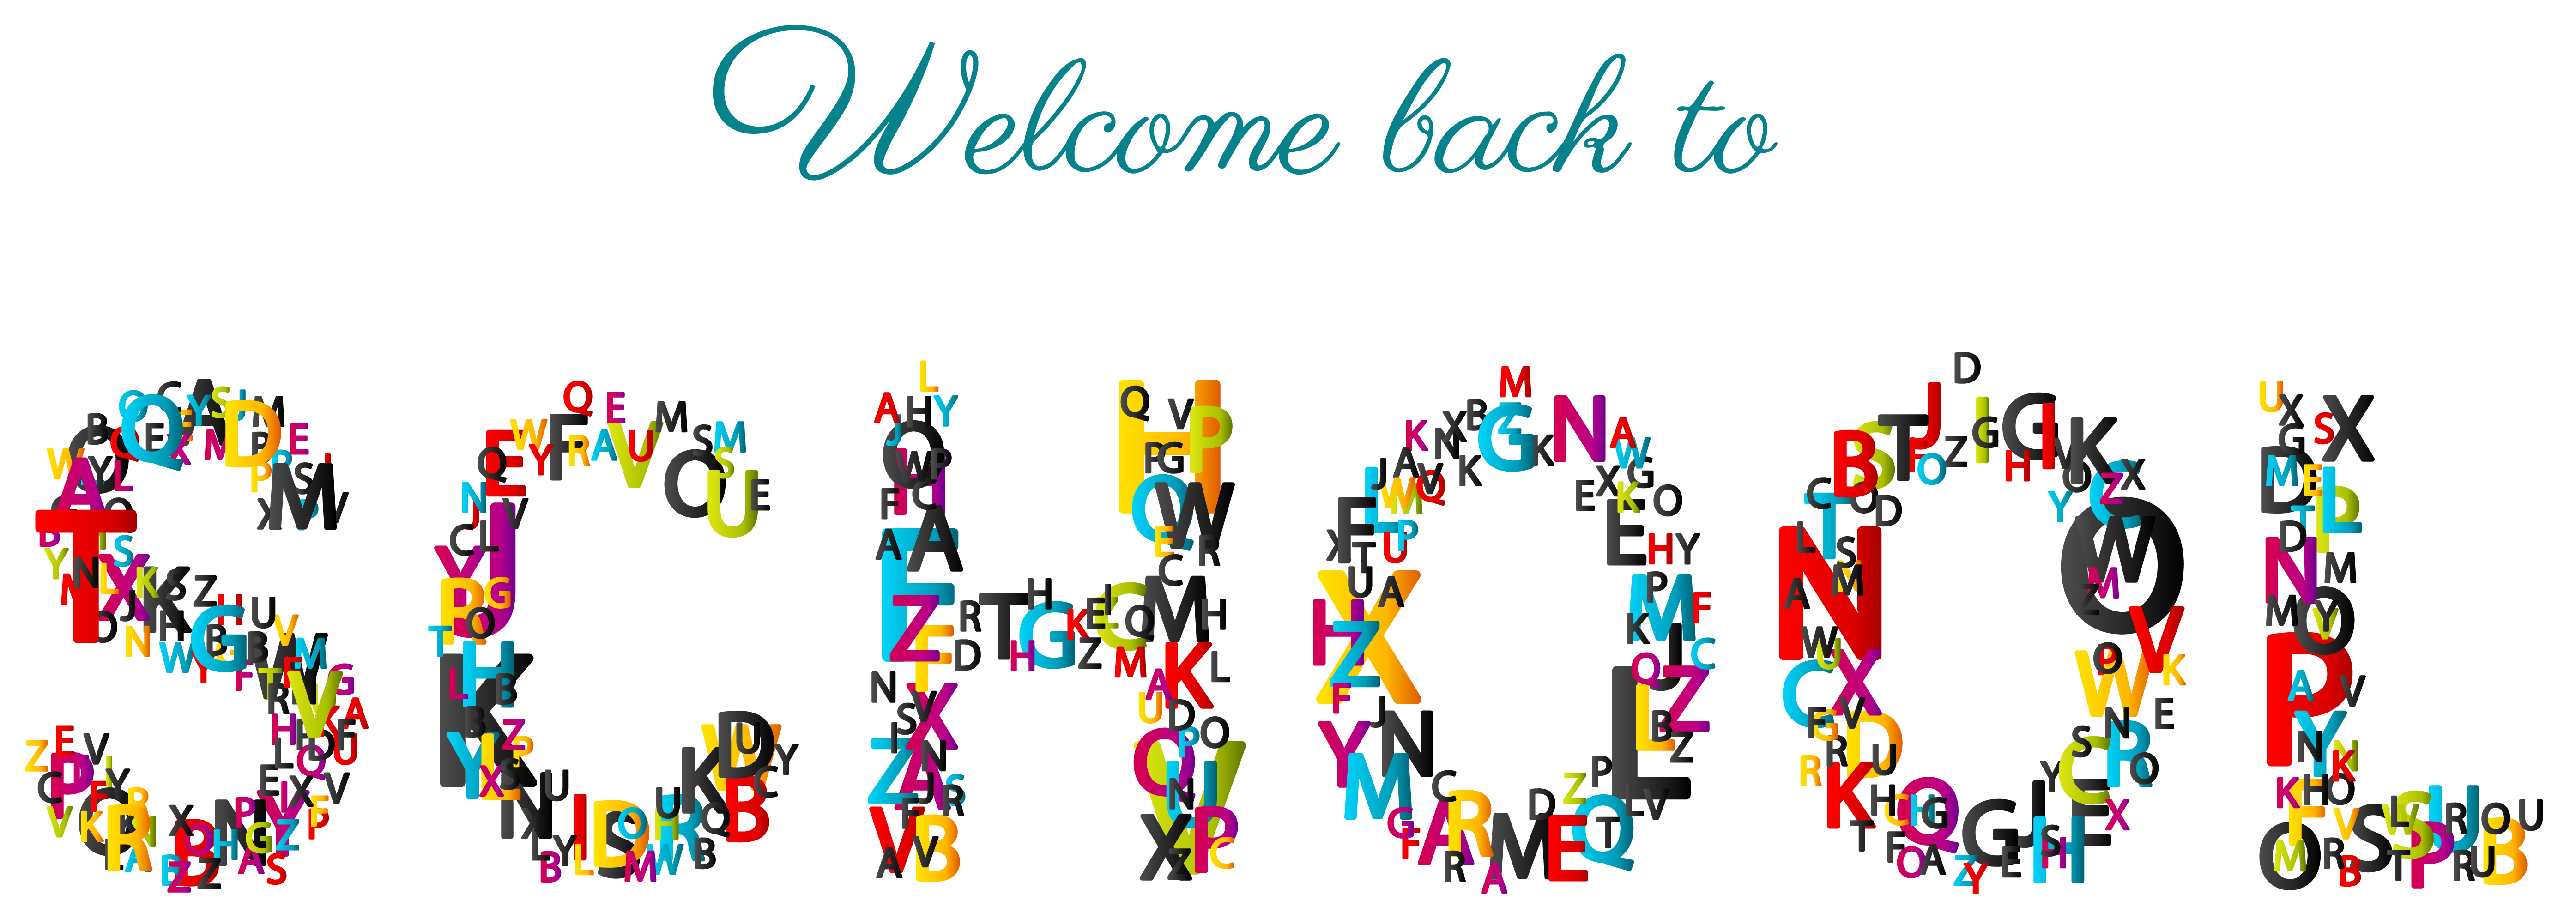 welcome back to school clipar - Welcome Back To School Clip Art